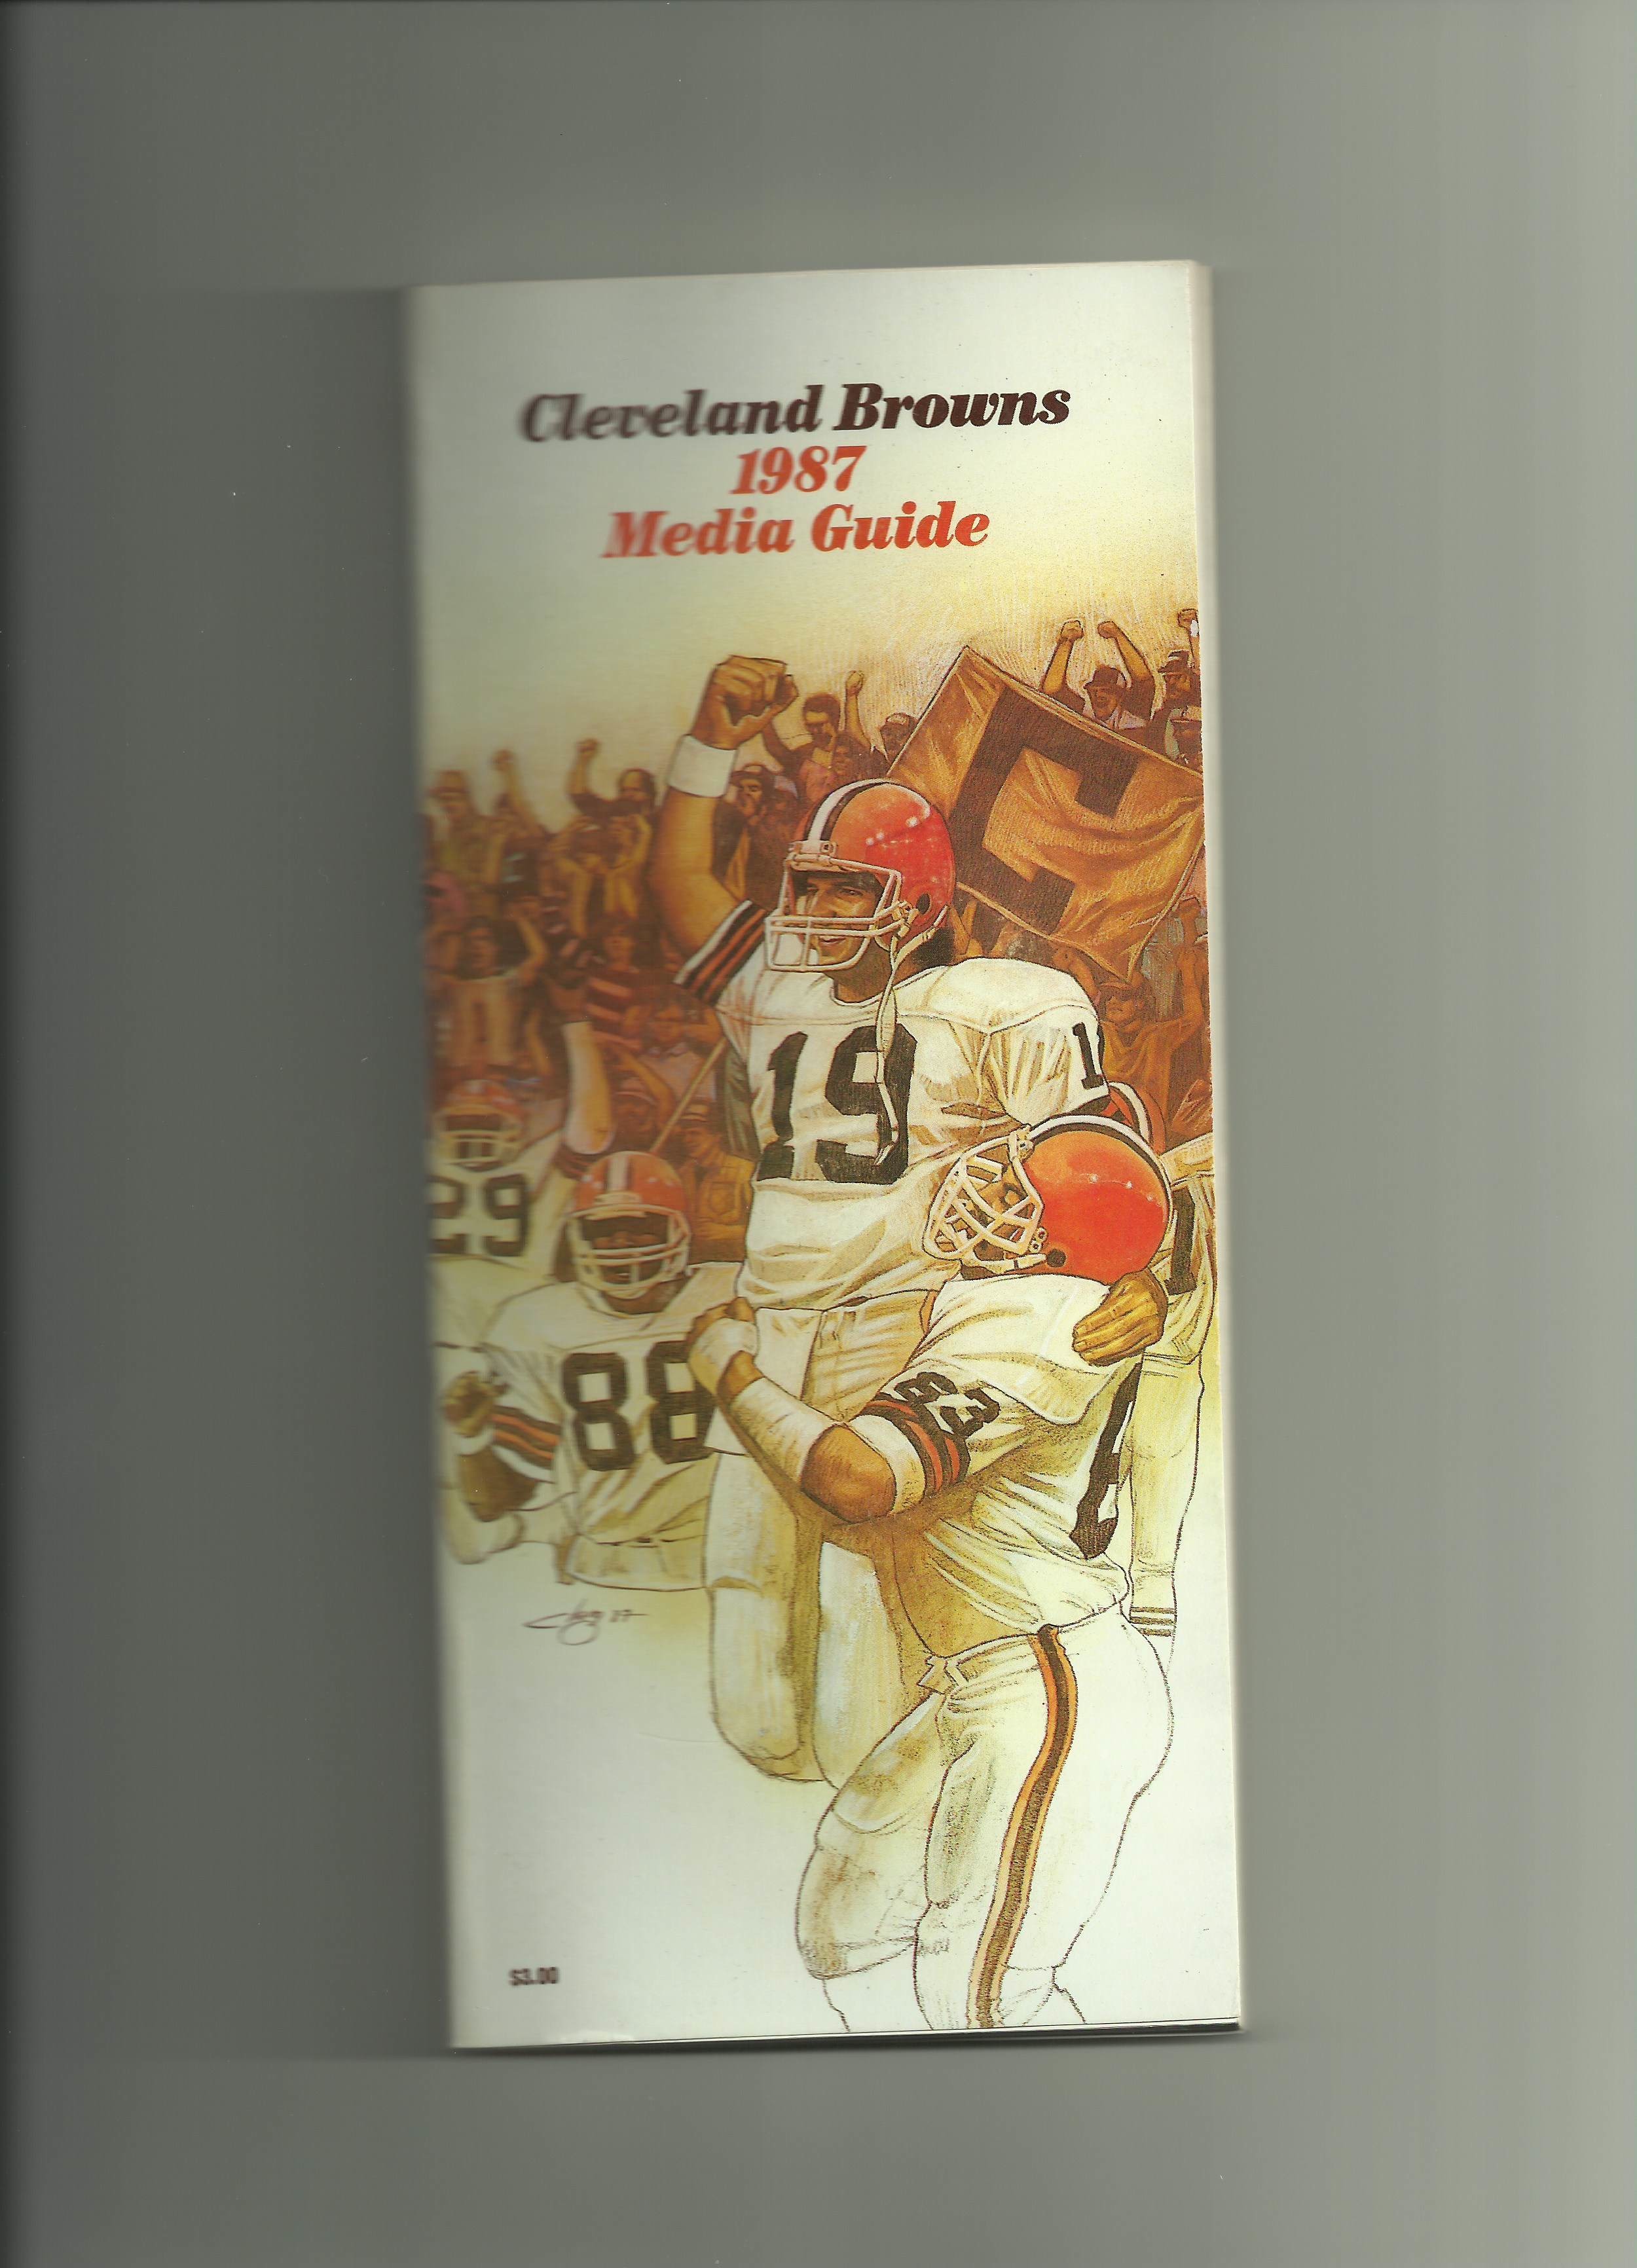 1987 Browns media guide